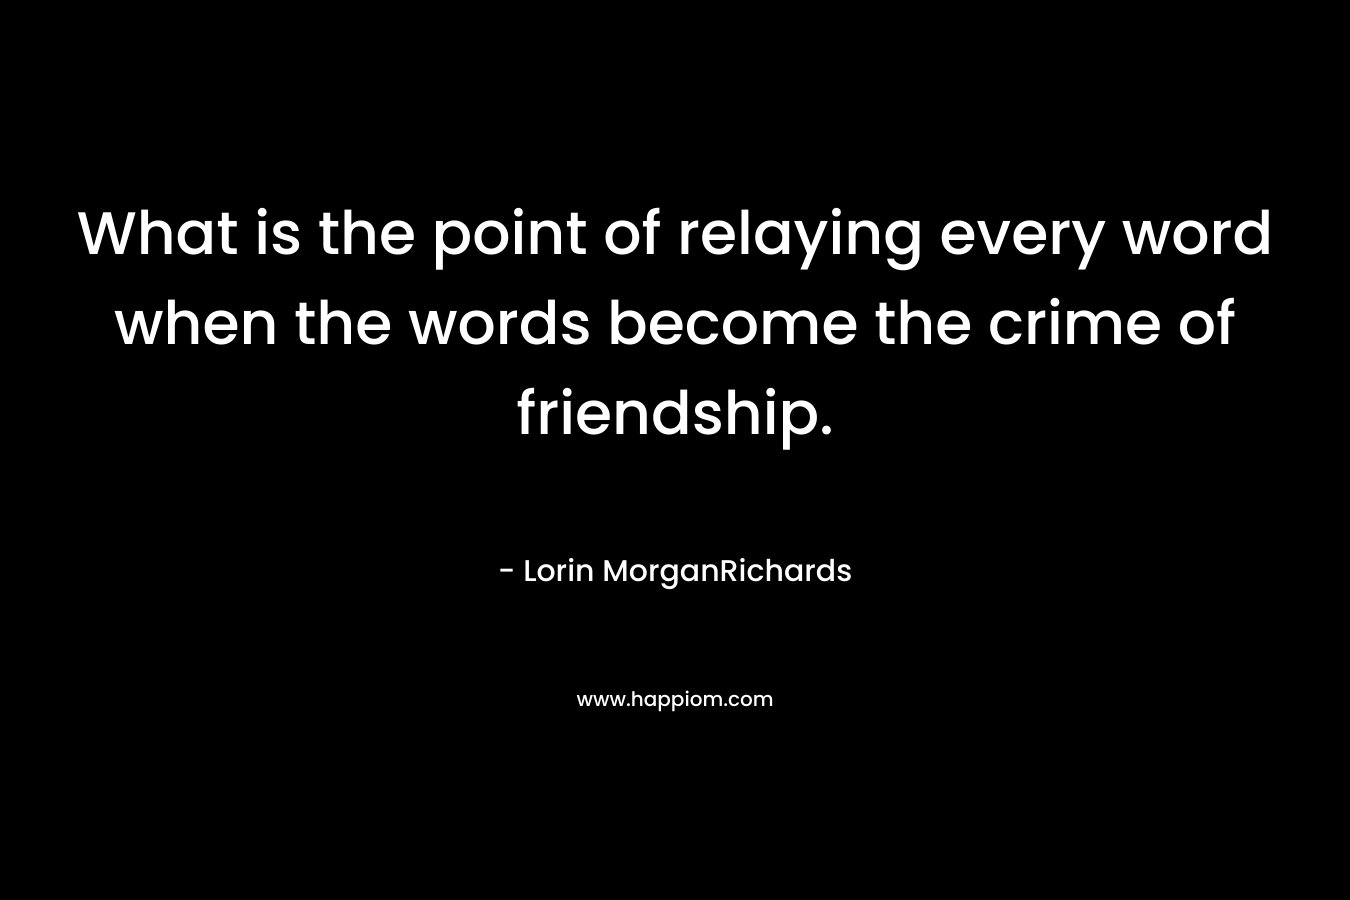 What is the point of relaying every word when the words become the crime of friendship. – Lorin MorganRichards